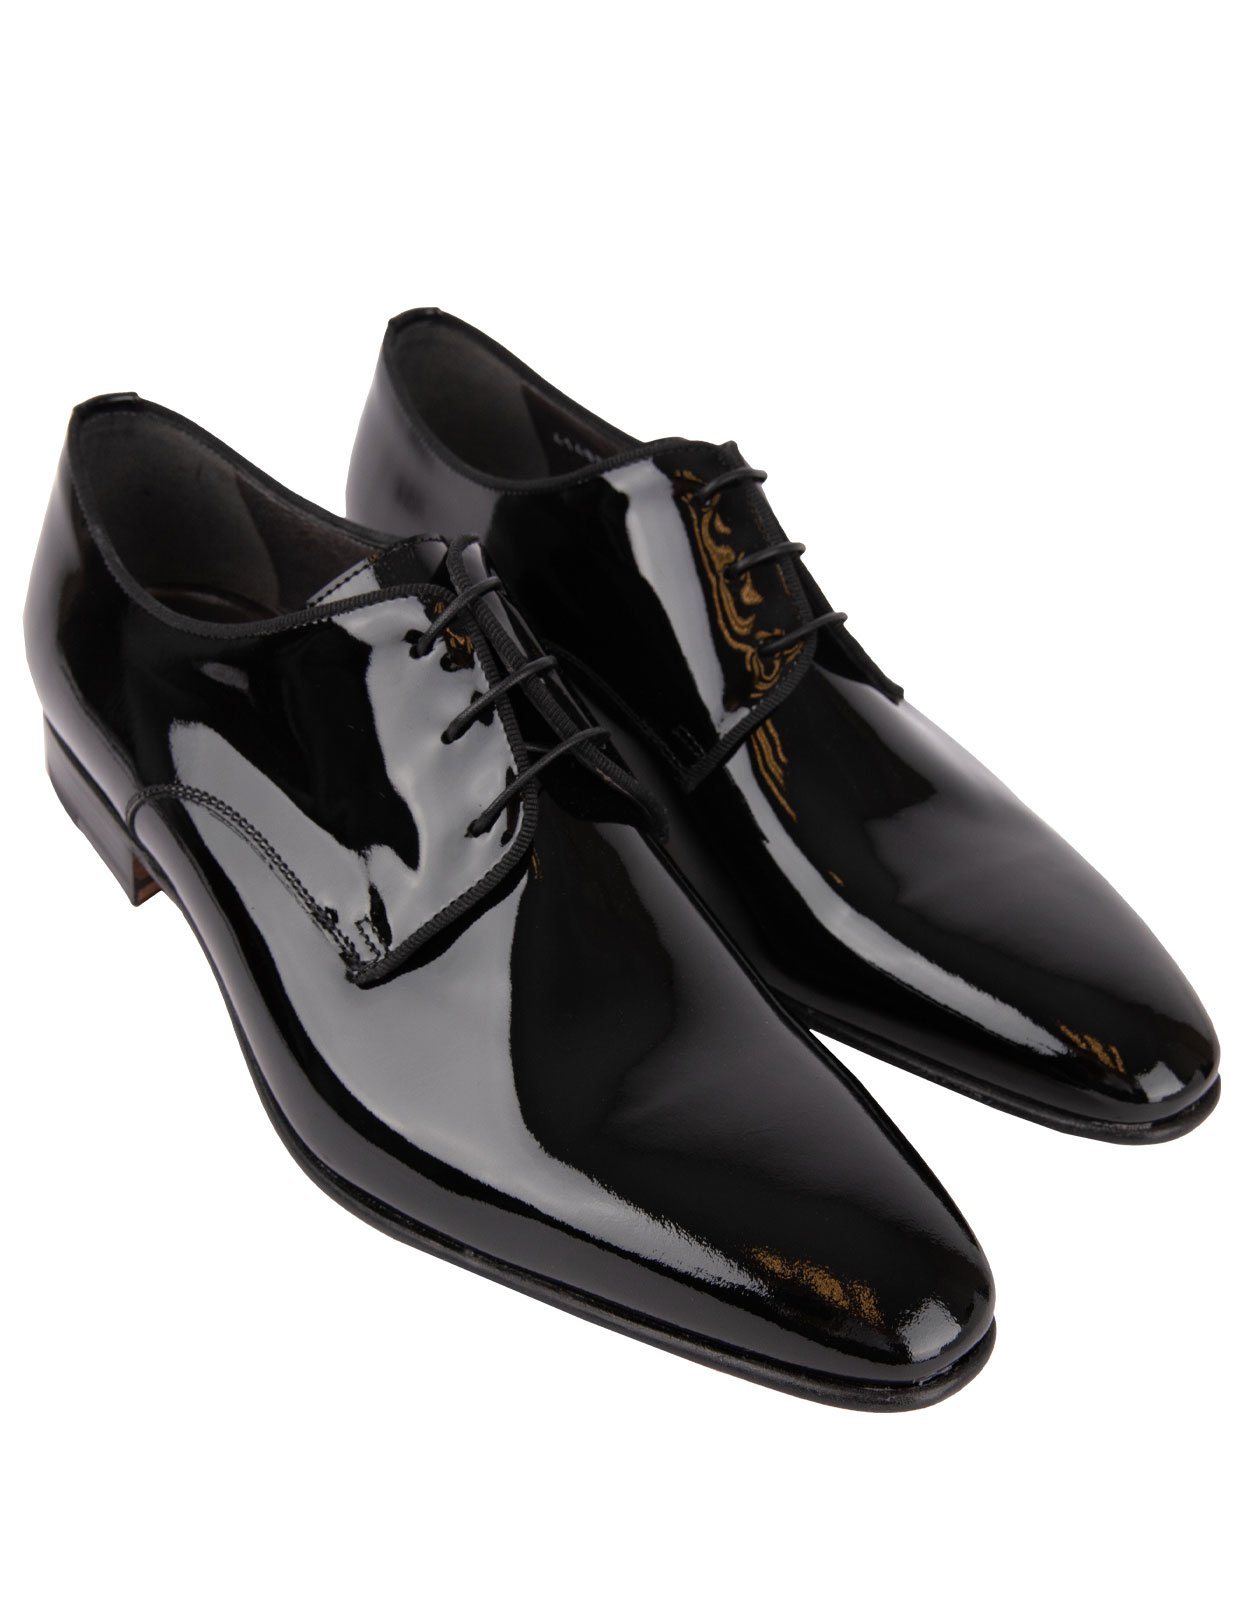 Lille Patent Leather Derby Shoes Black Stl 10